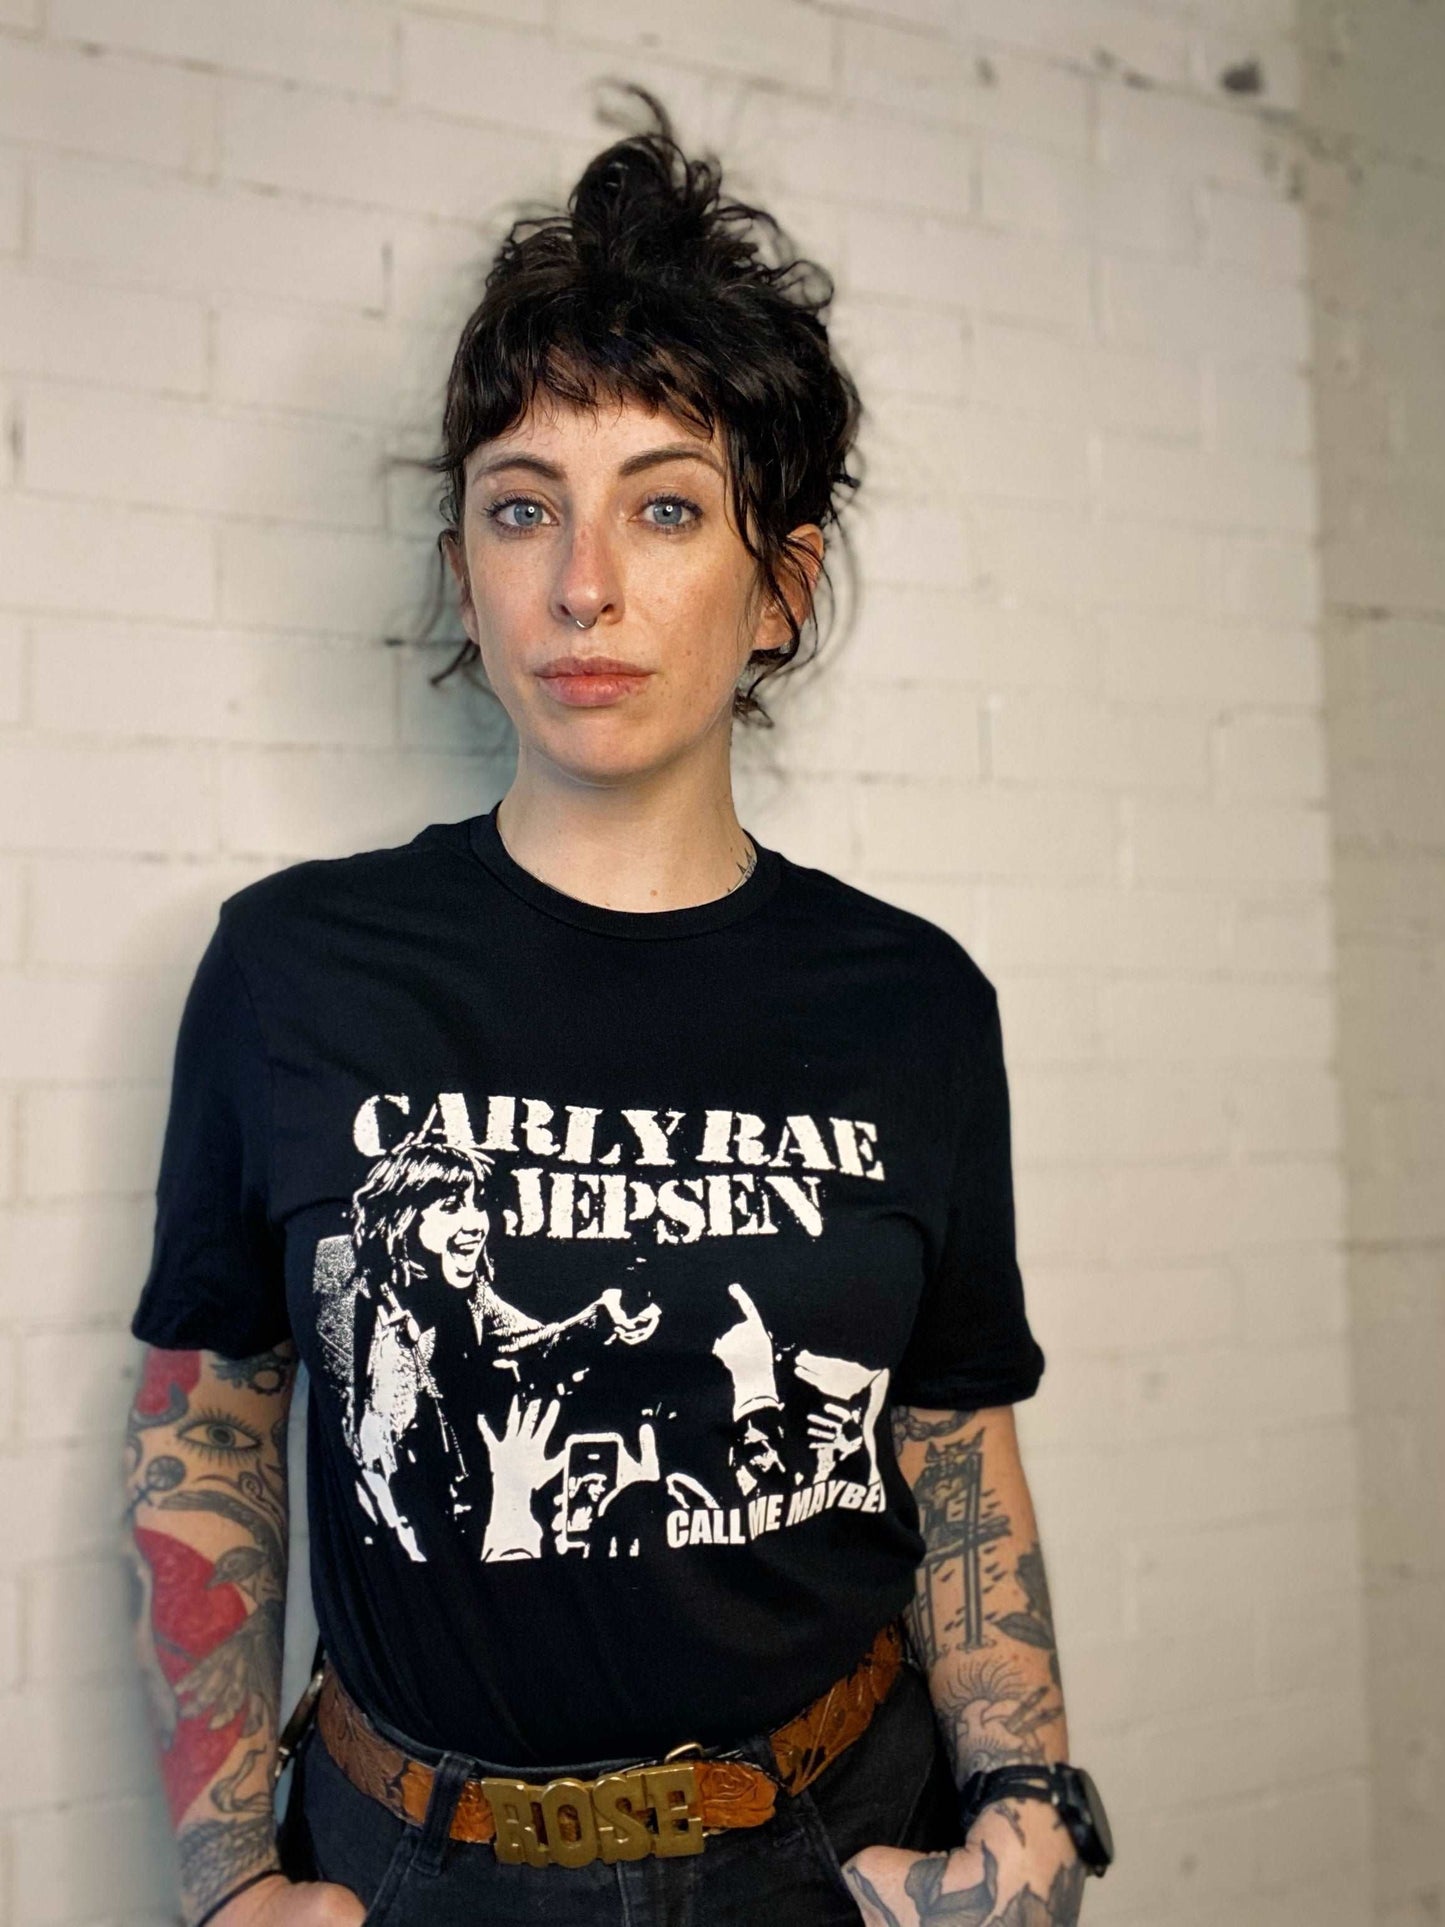 Carly Rae Jepsen // Government Issue Punk T-shirt